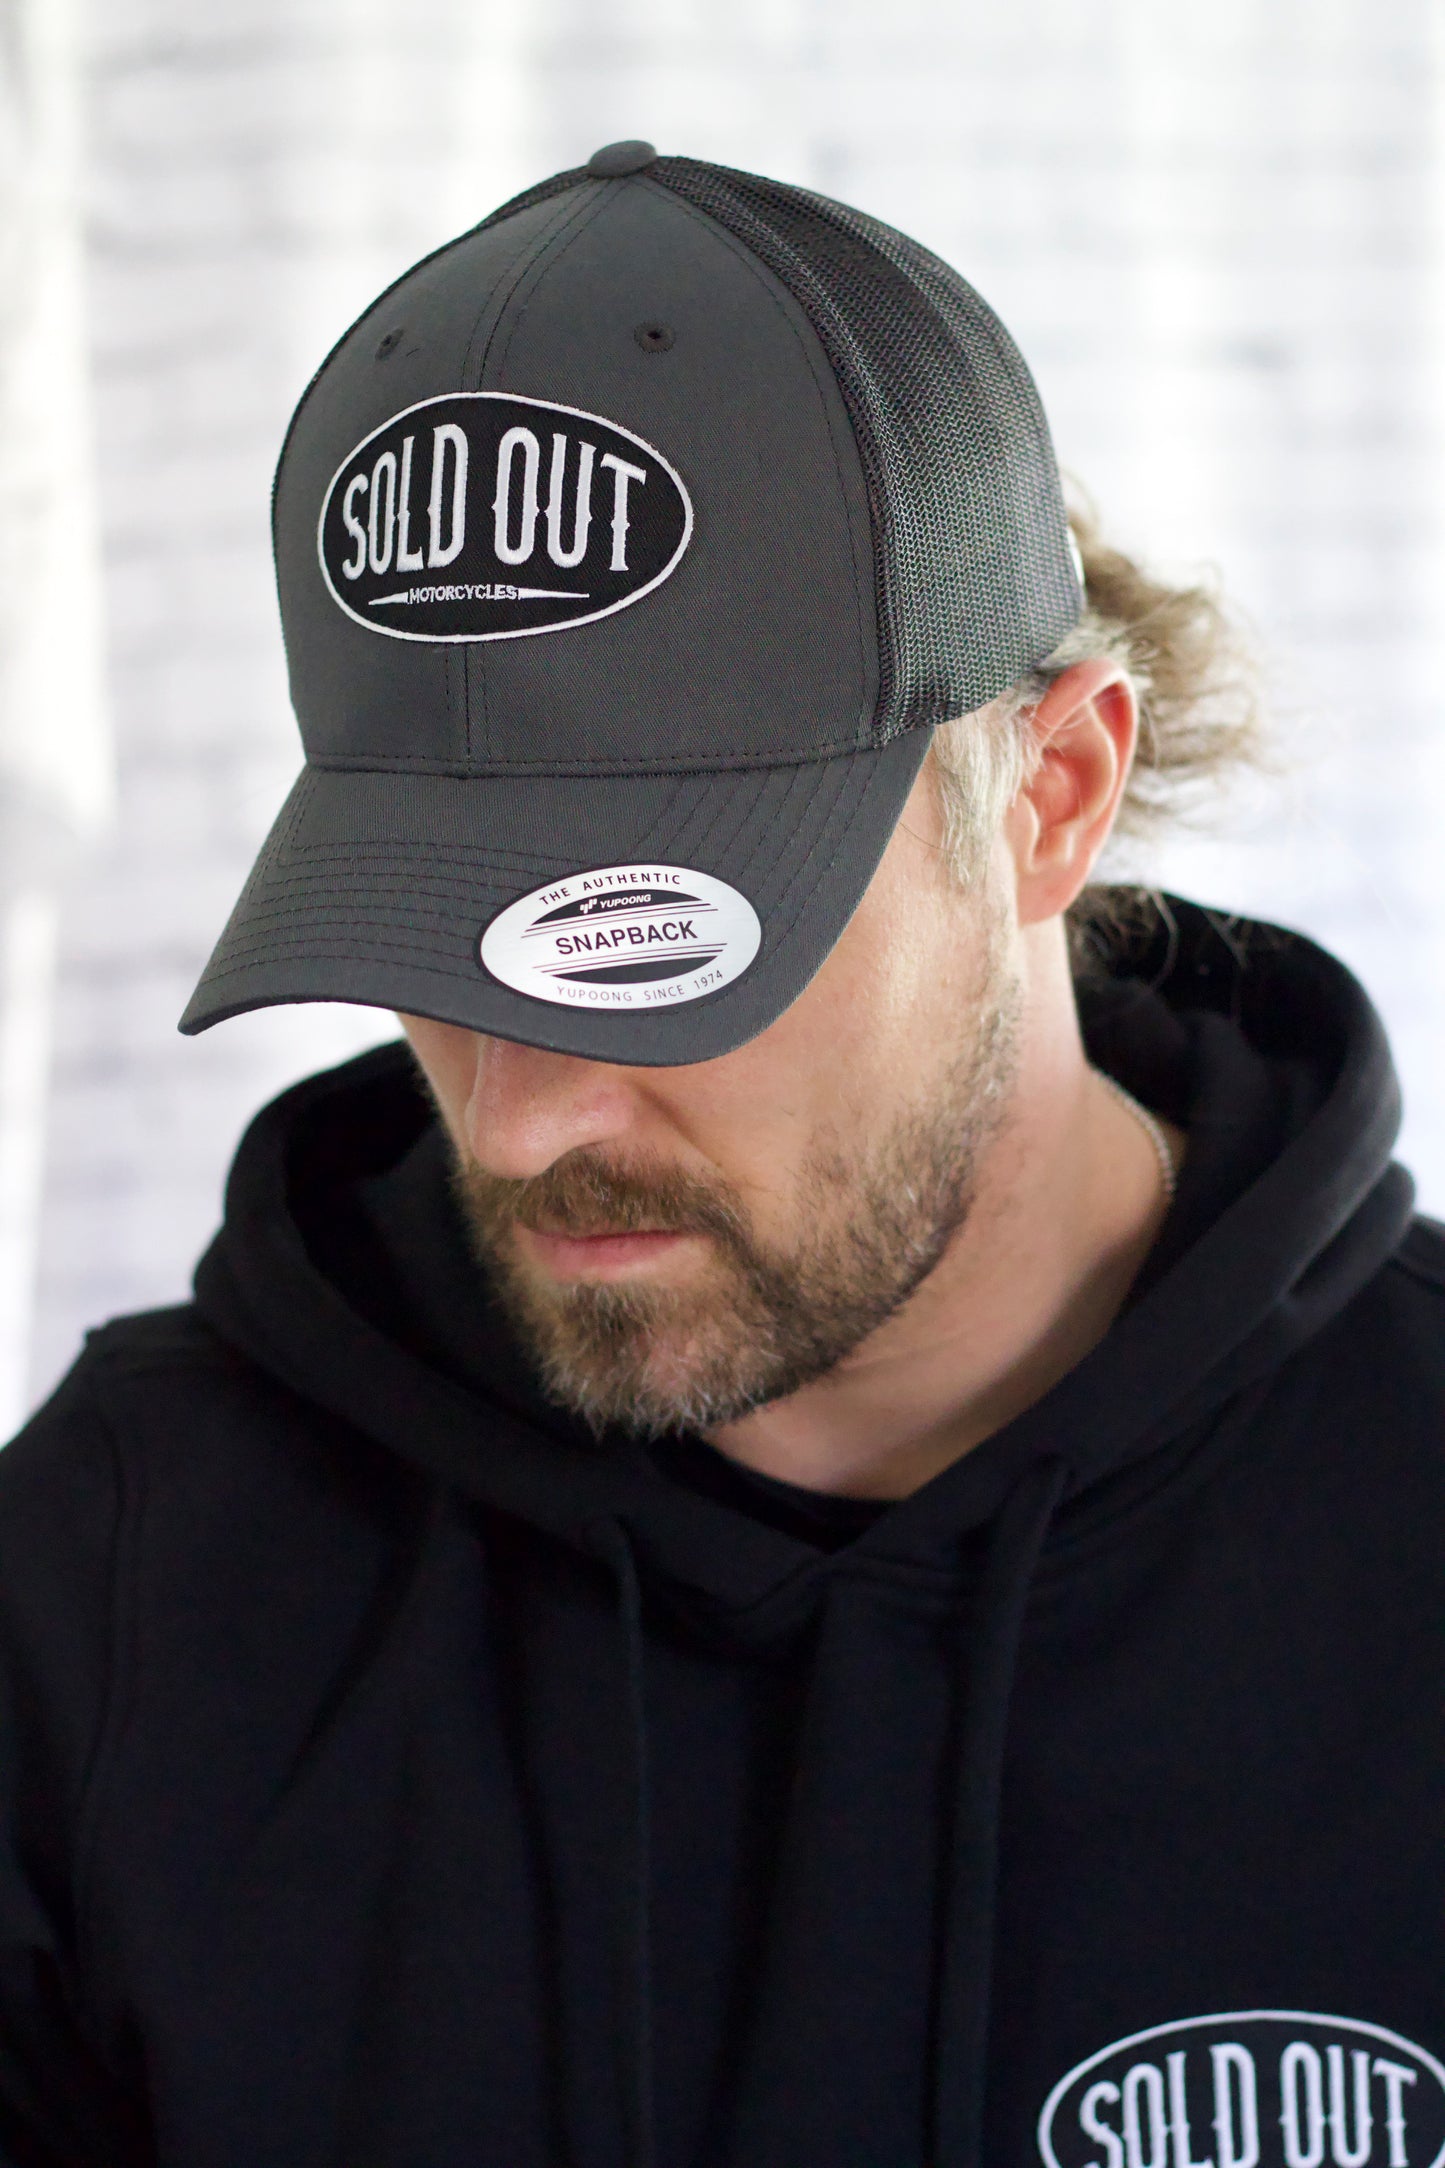 Sold Out Motorcycles Trucker Cap